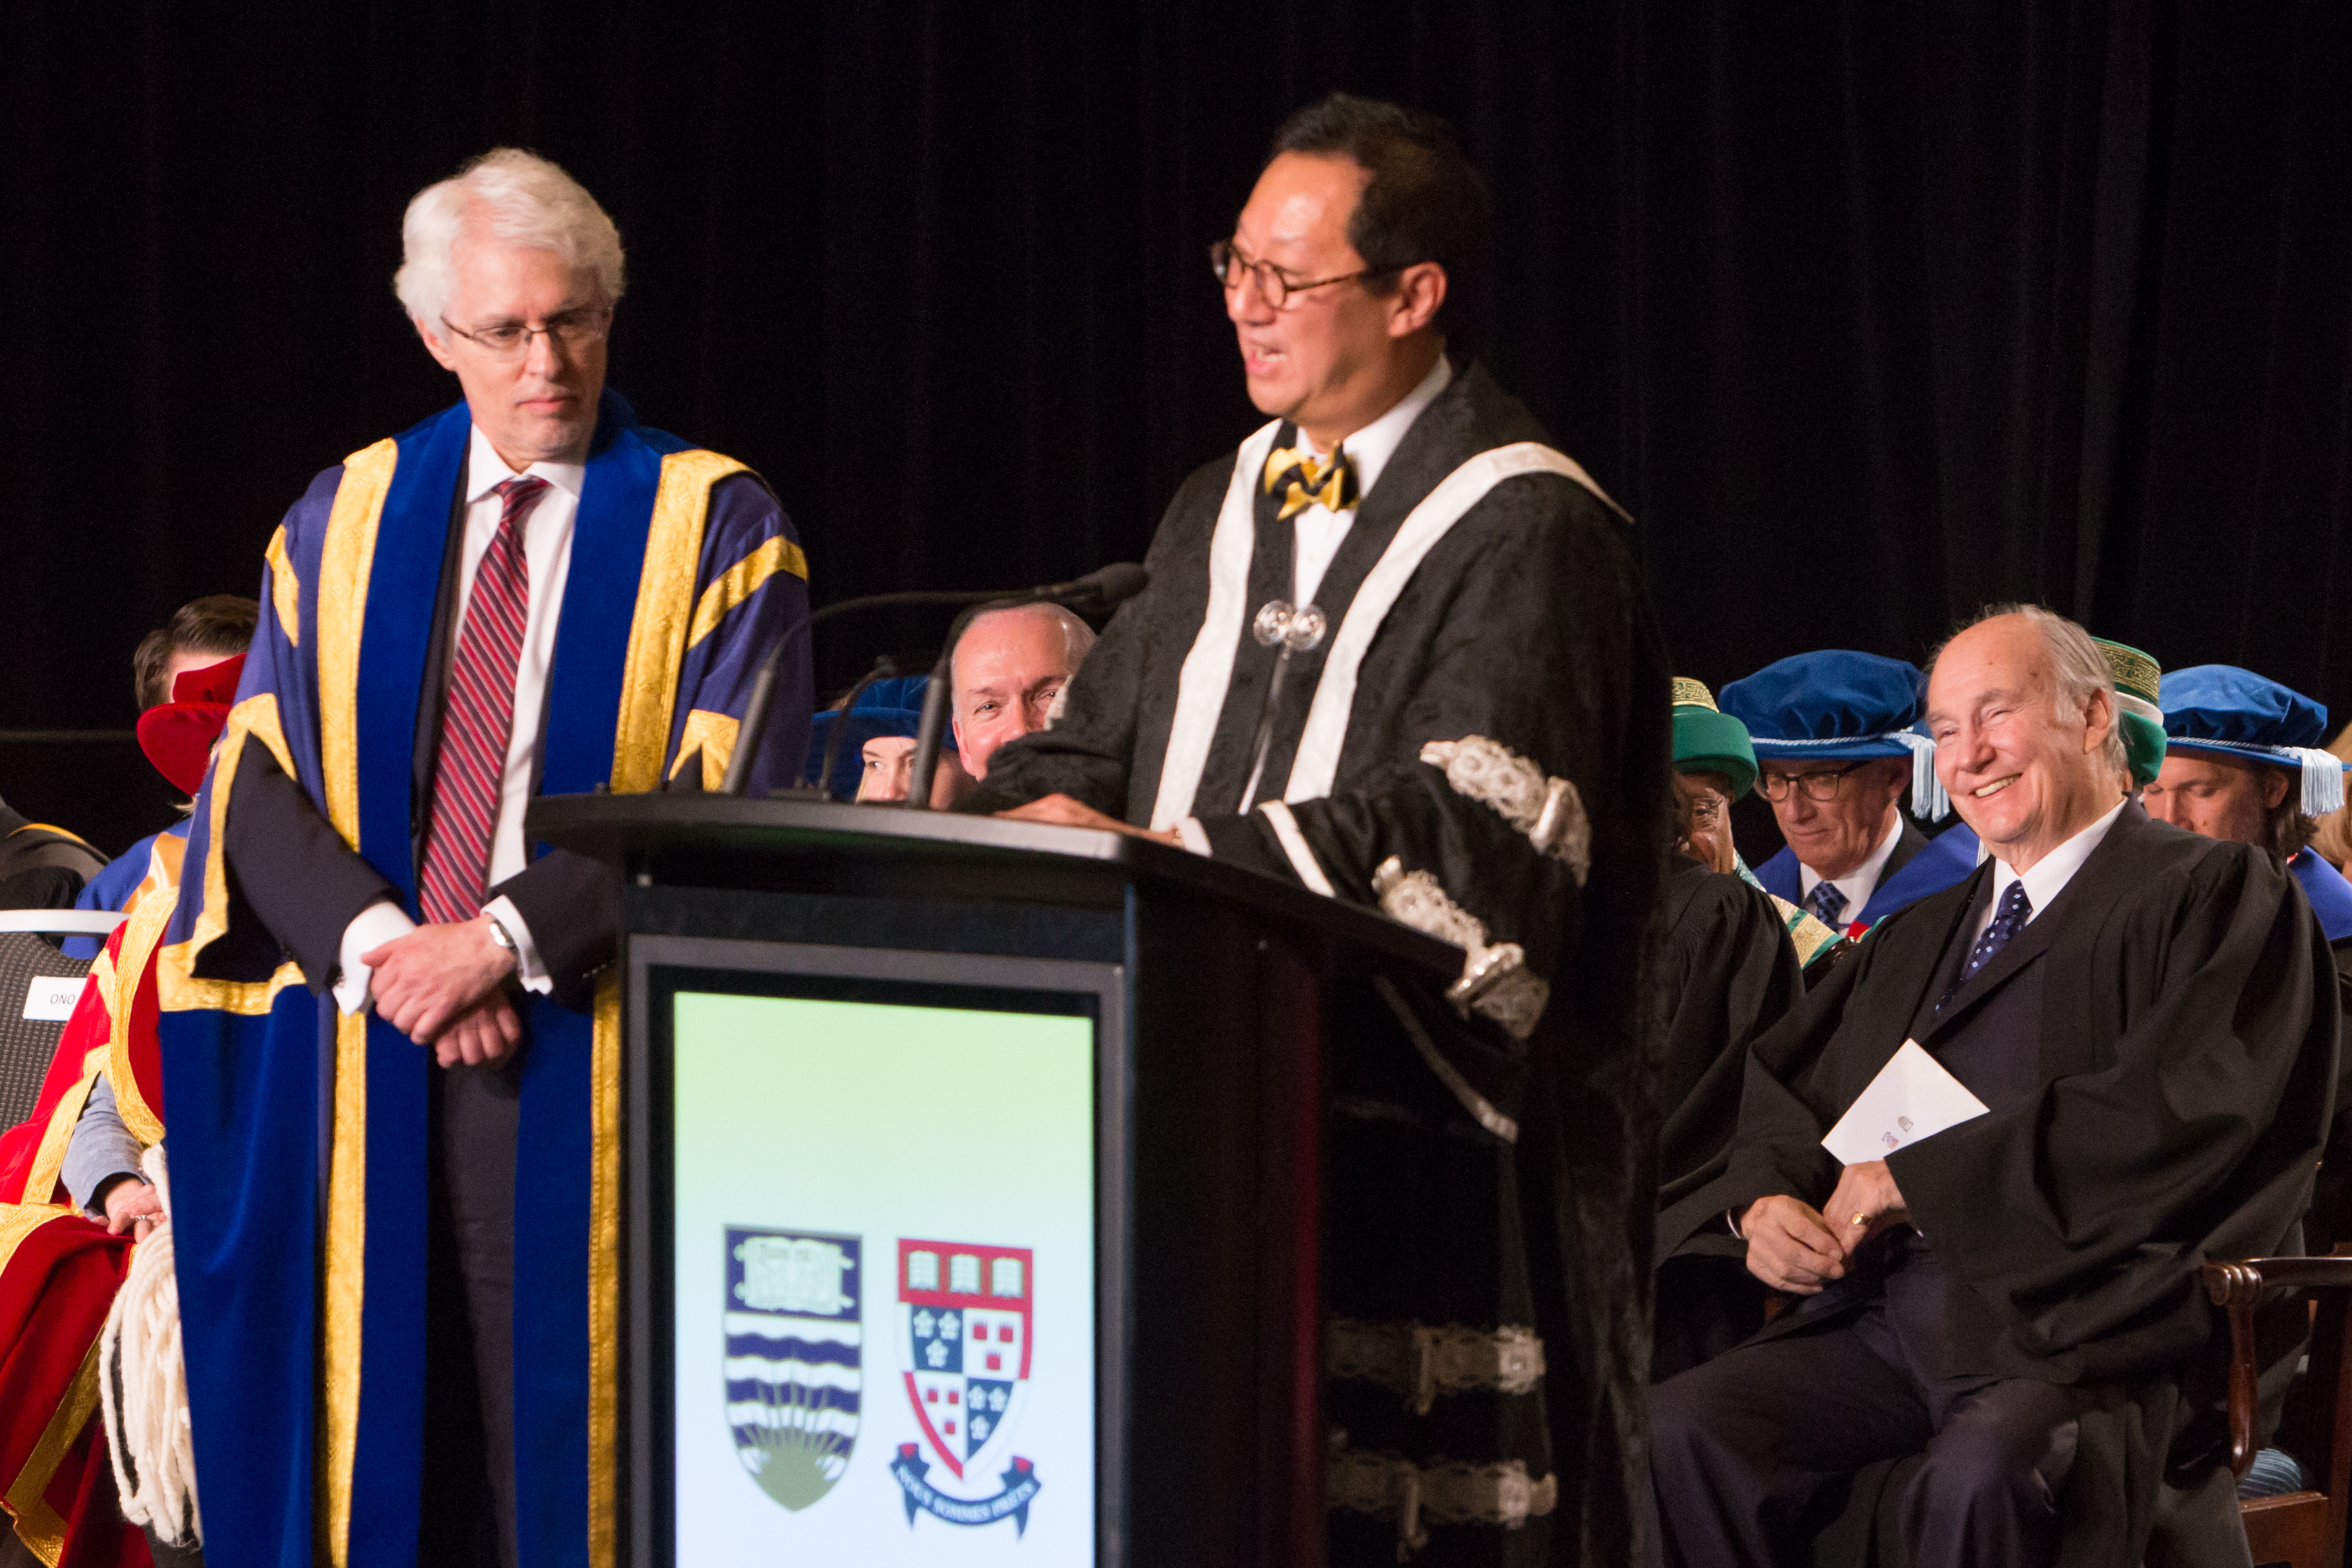 Citation for His Highness the Aga Khan by Professor Santa Ono, President  and Vice-Chancellor of the University of British Columbia